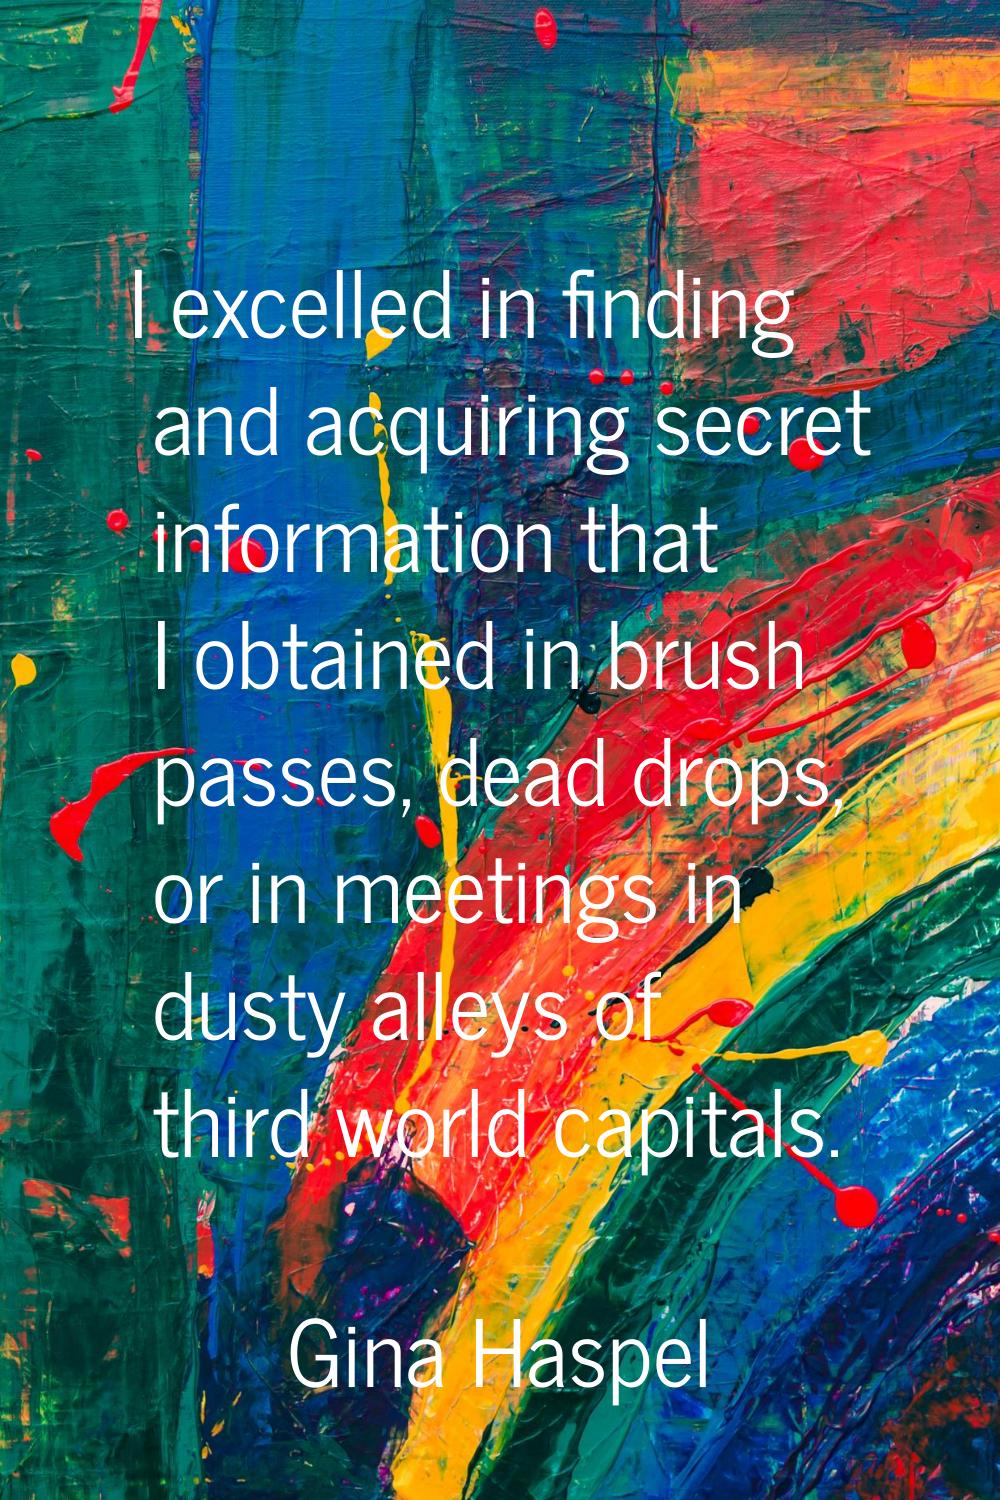 I excelled in finding and acquiring secret information that I obtained in brush passes, dead drops,